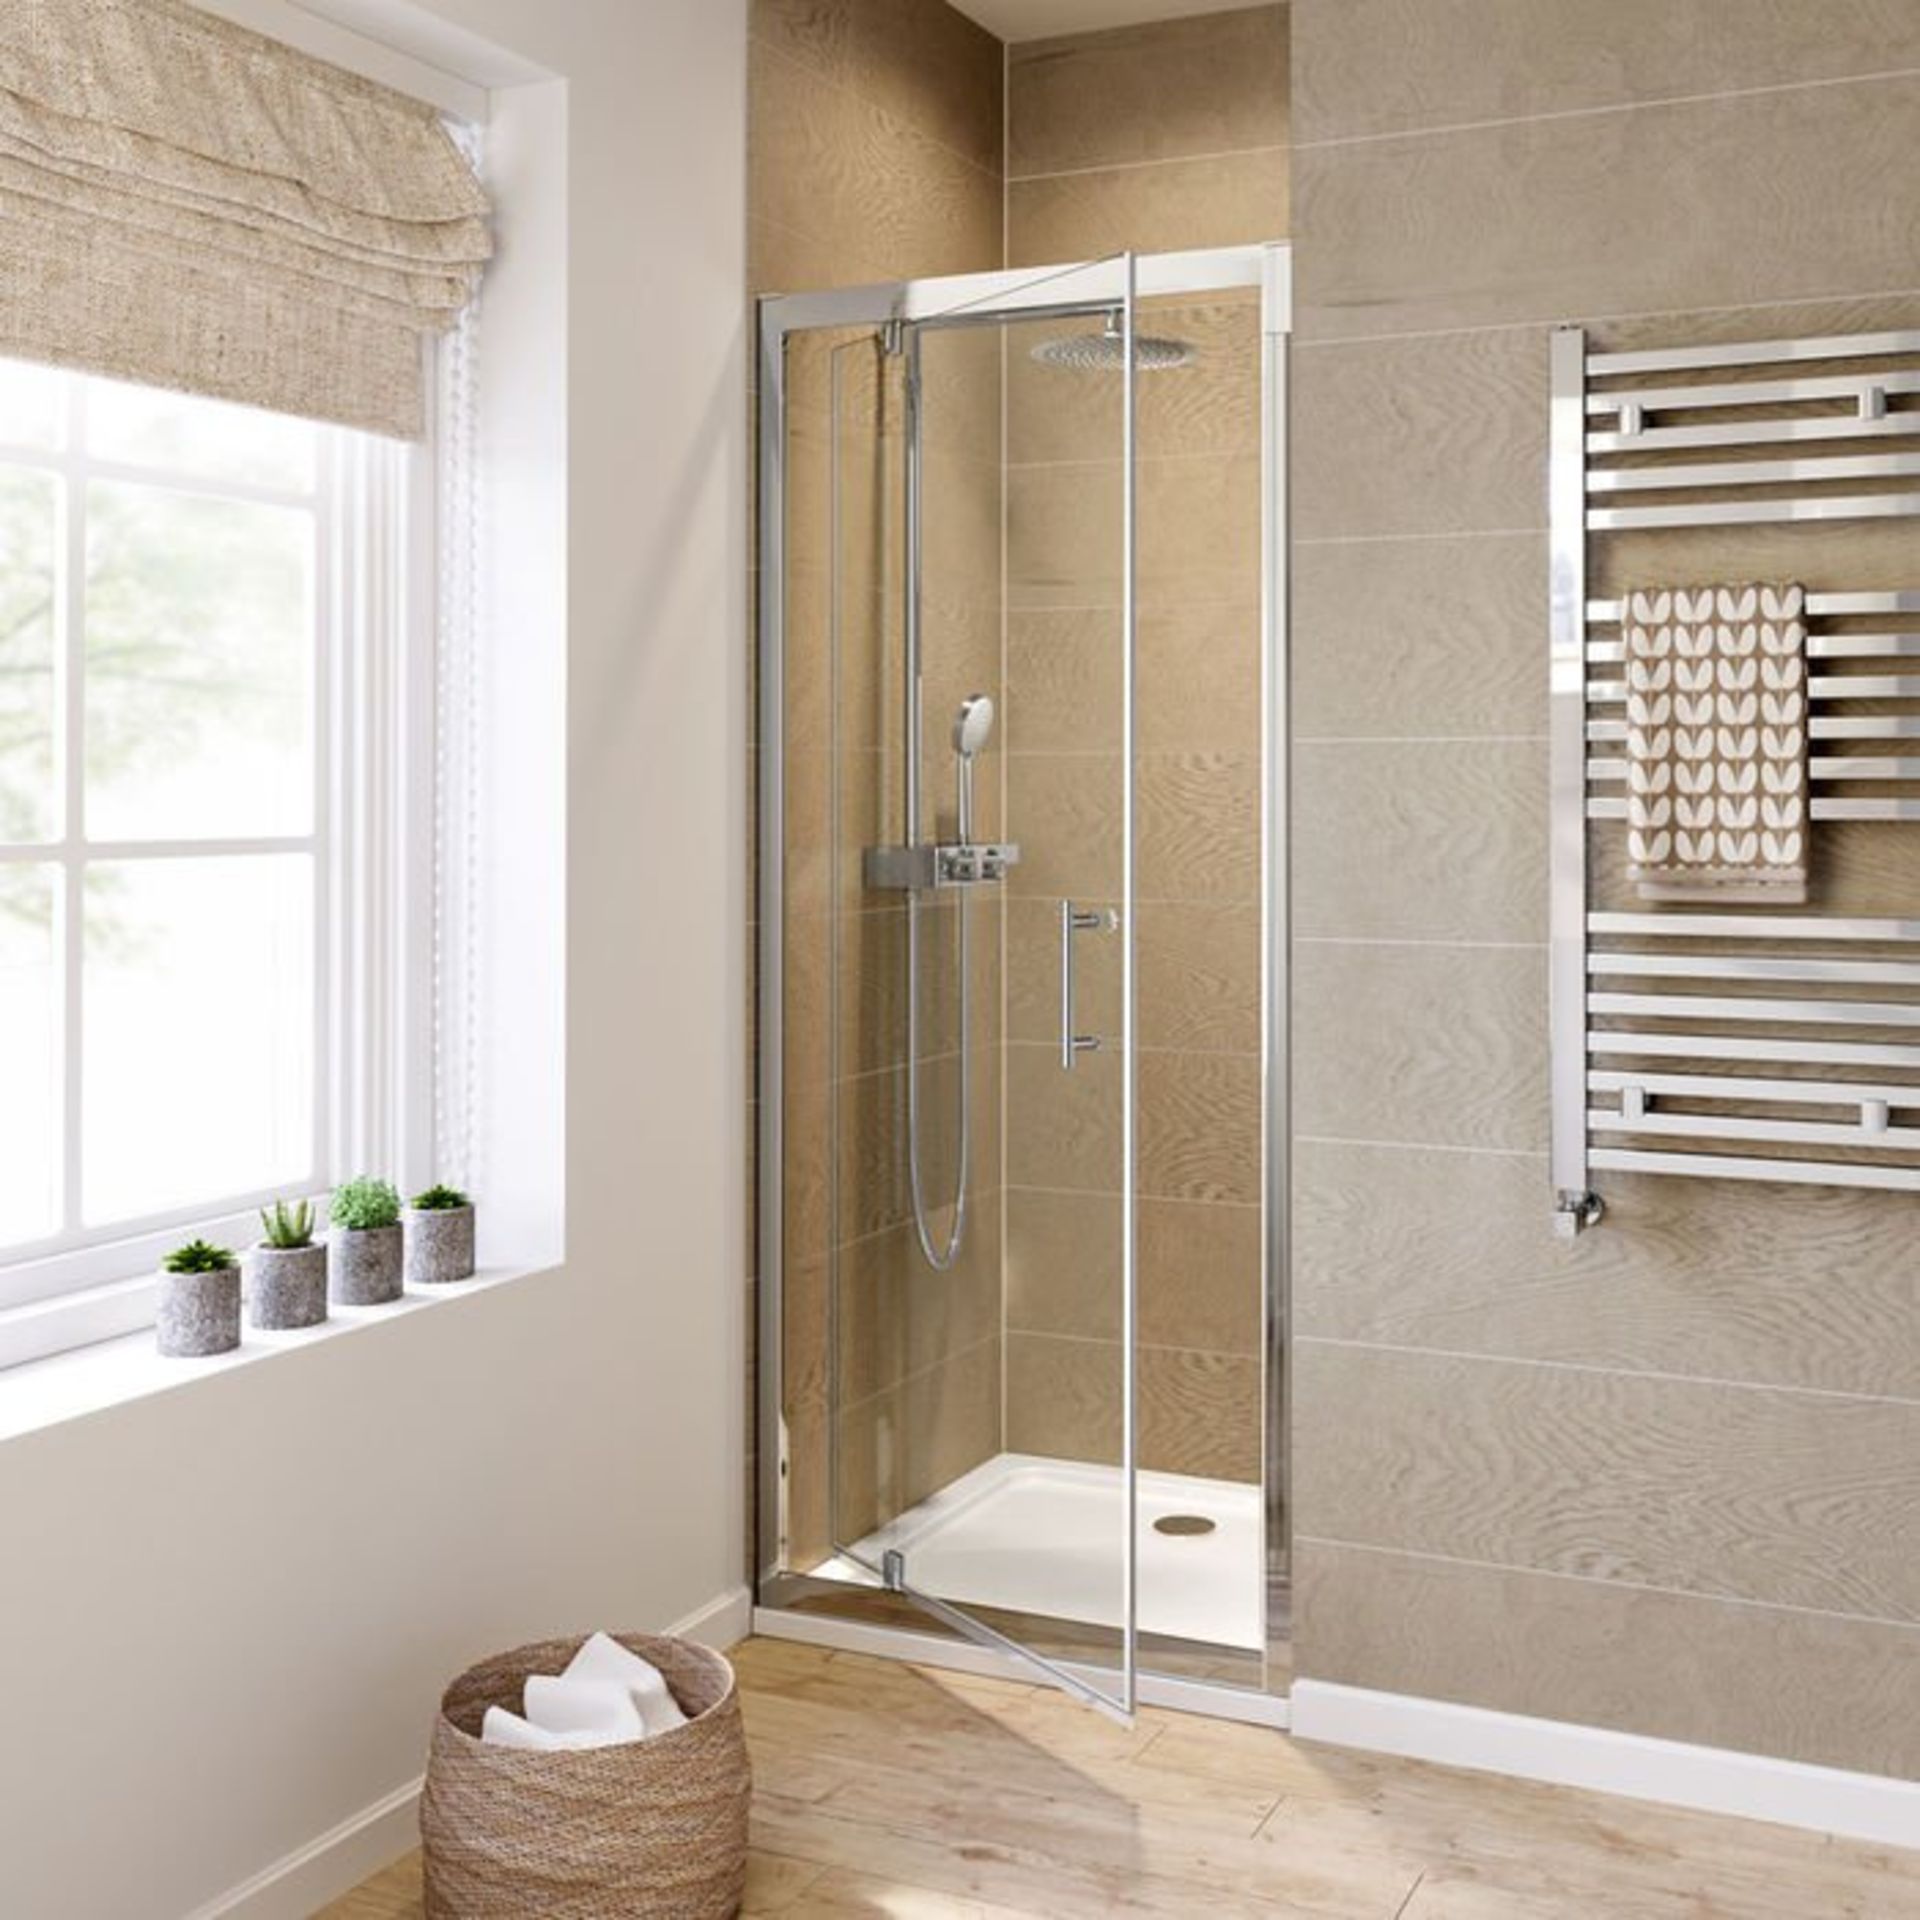 (K15) 800mm - 6mm - Elements Pivot Shower Door. MRRP £299.99.6mm Safety GlassFully waterproof - Image 2 of 2